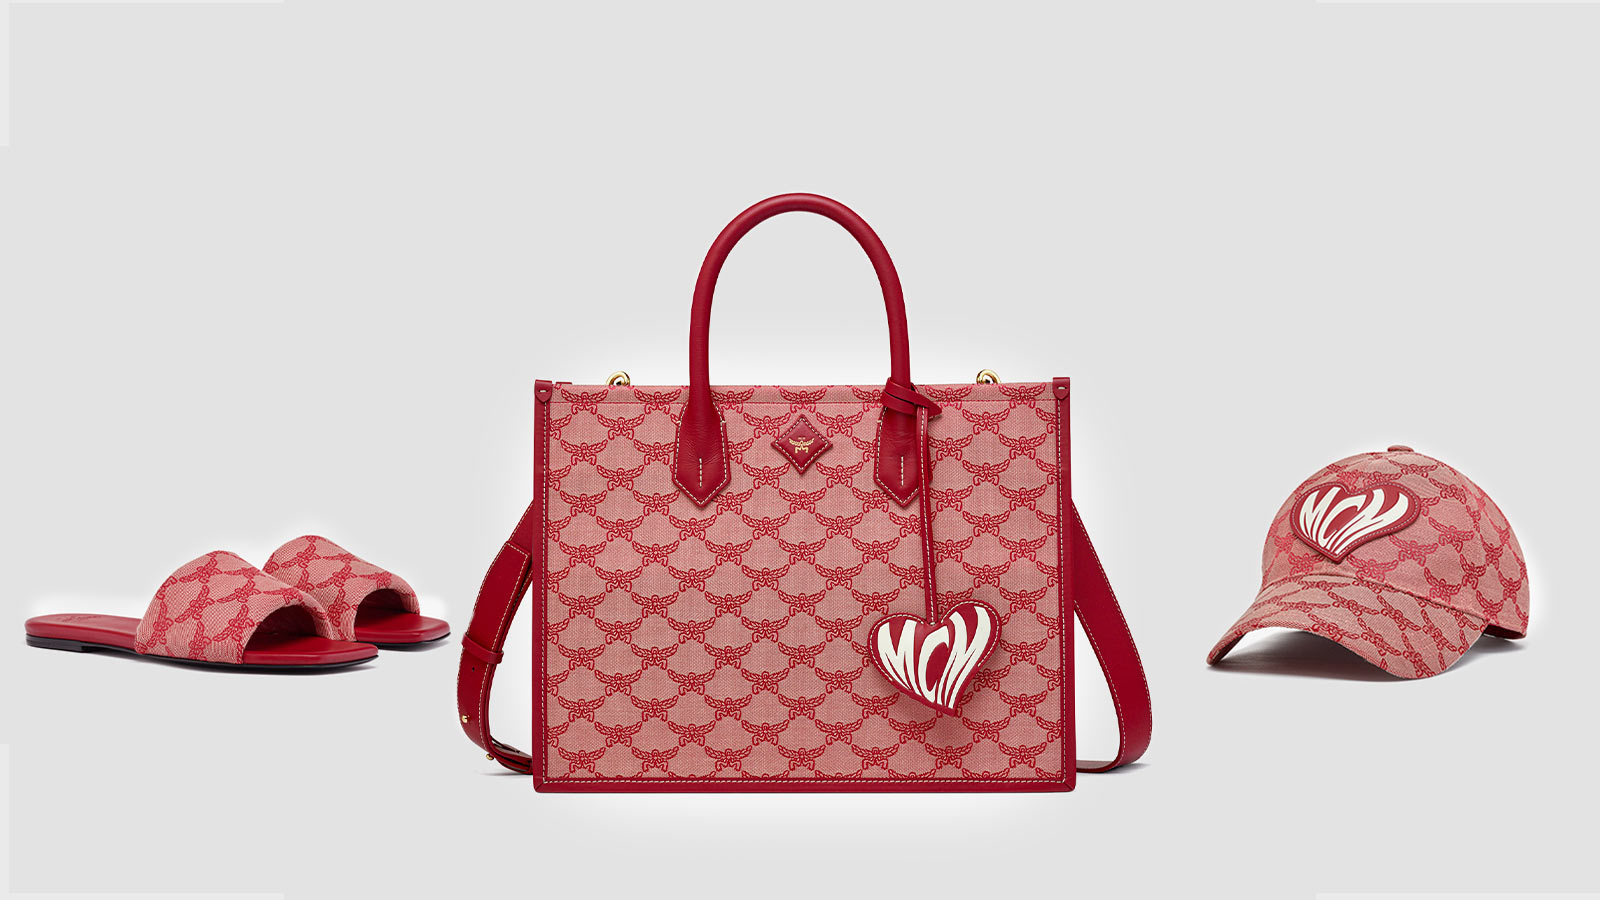 The new Valentine's collection from MCM Teaser